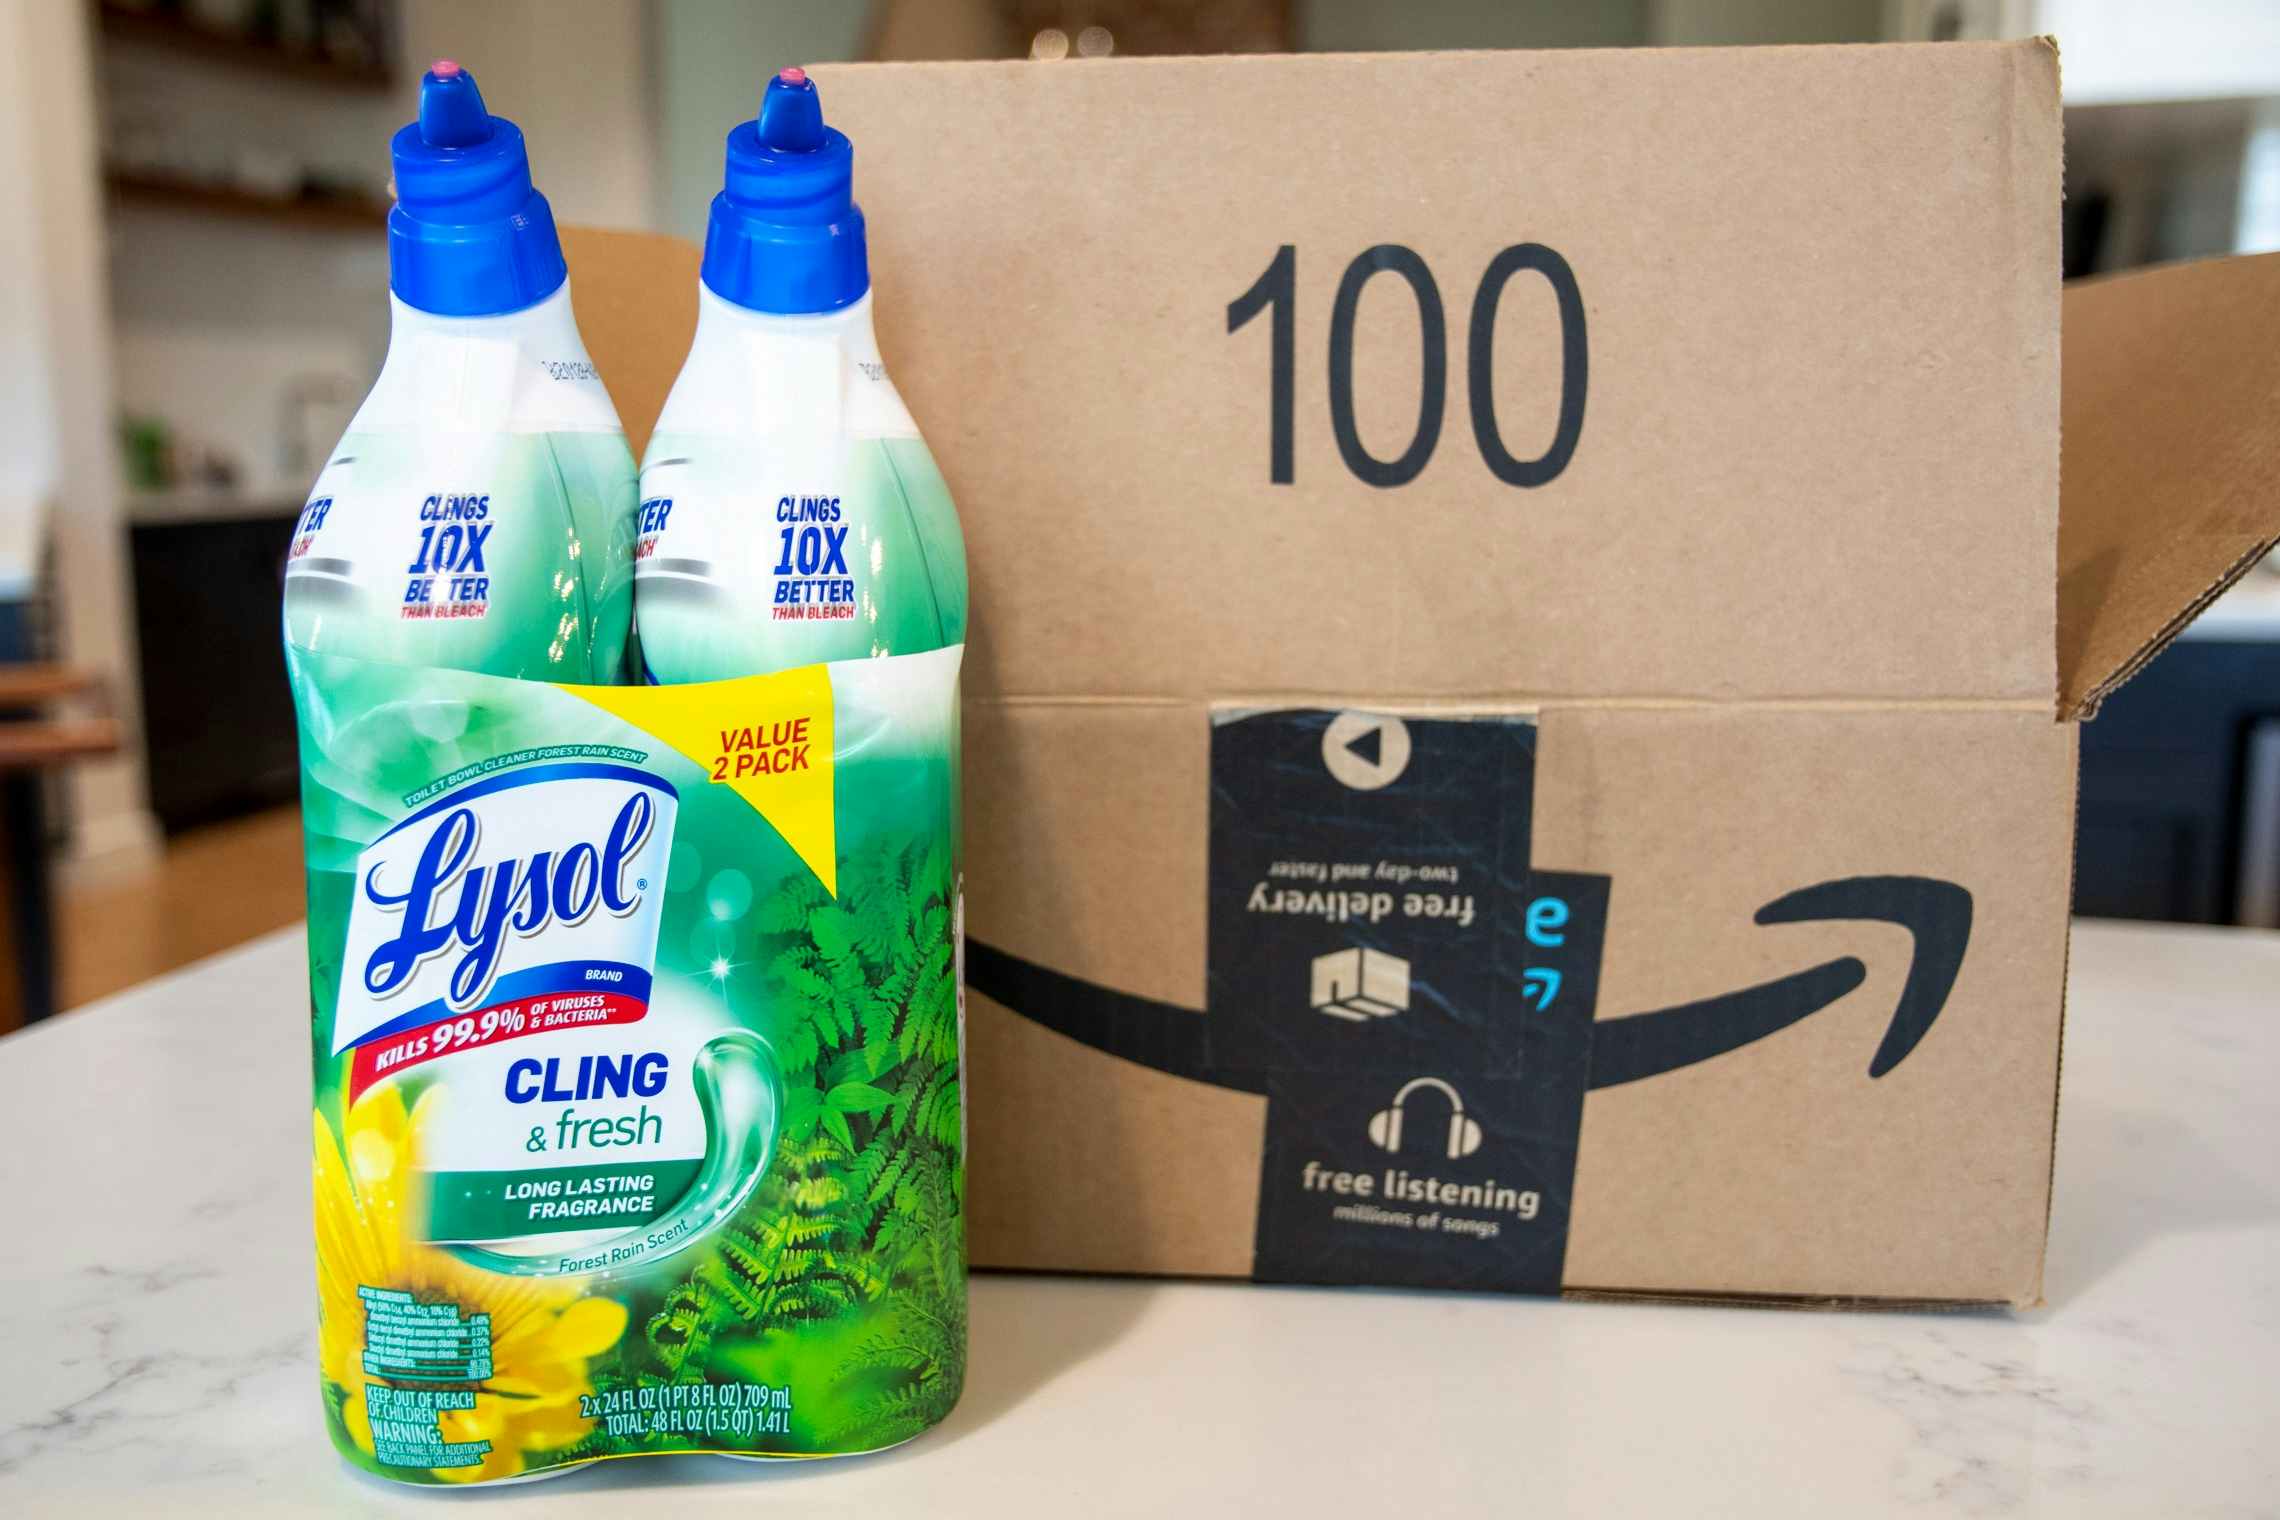 Lysol Toilet Bowl Cleaner 2-Pack, as Low as $3.08 on Amazon